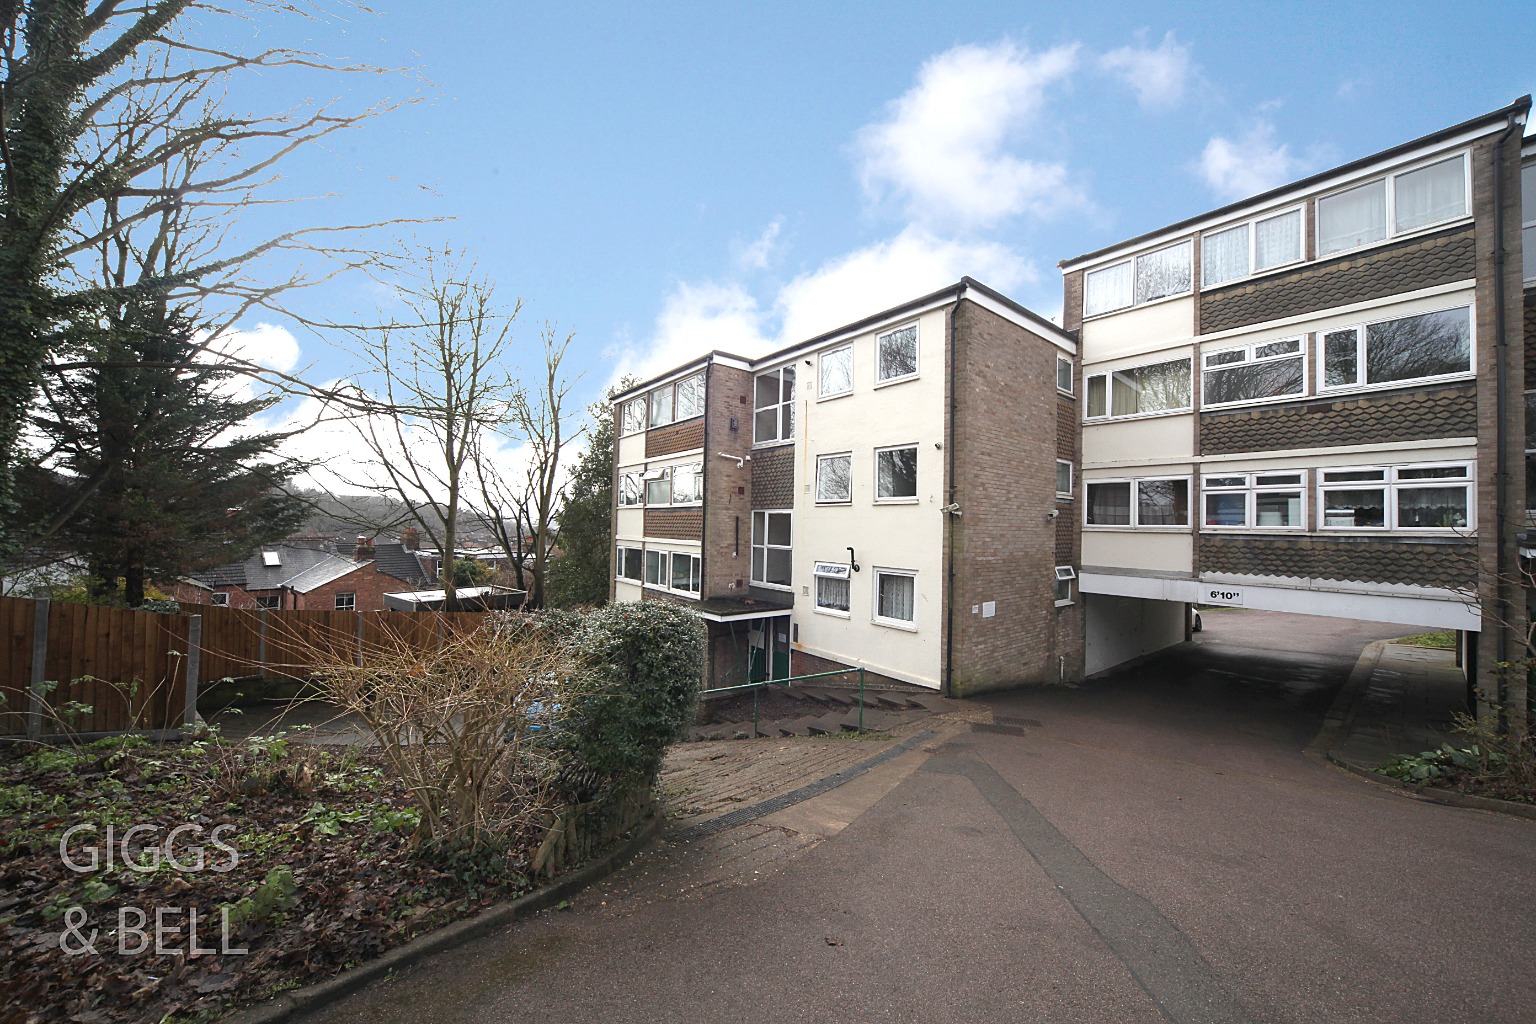 2 bed flat for sale in Richmond Hill, Luton, LU2 